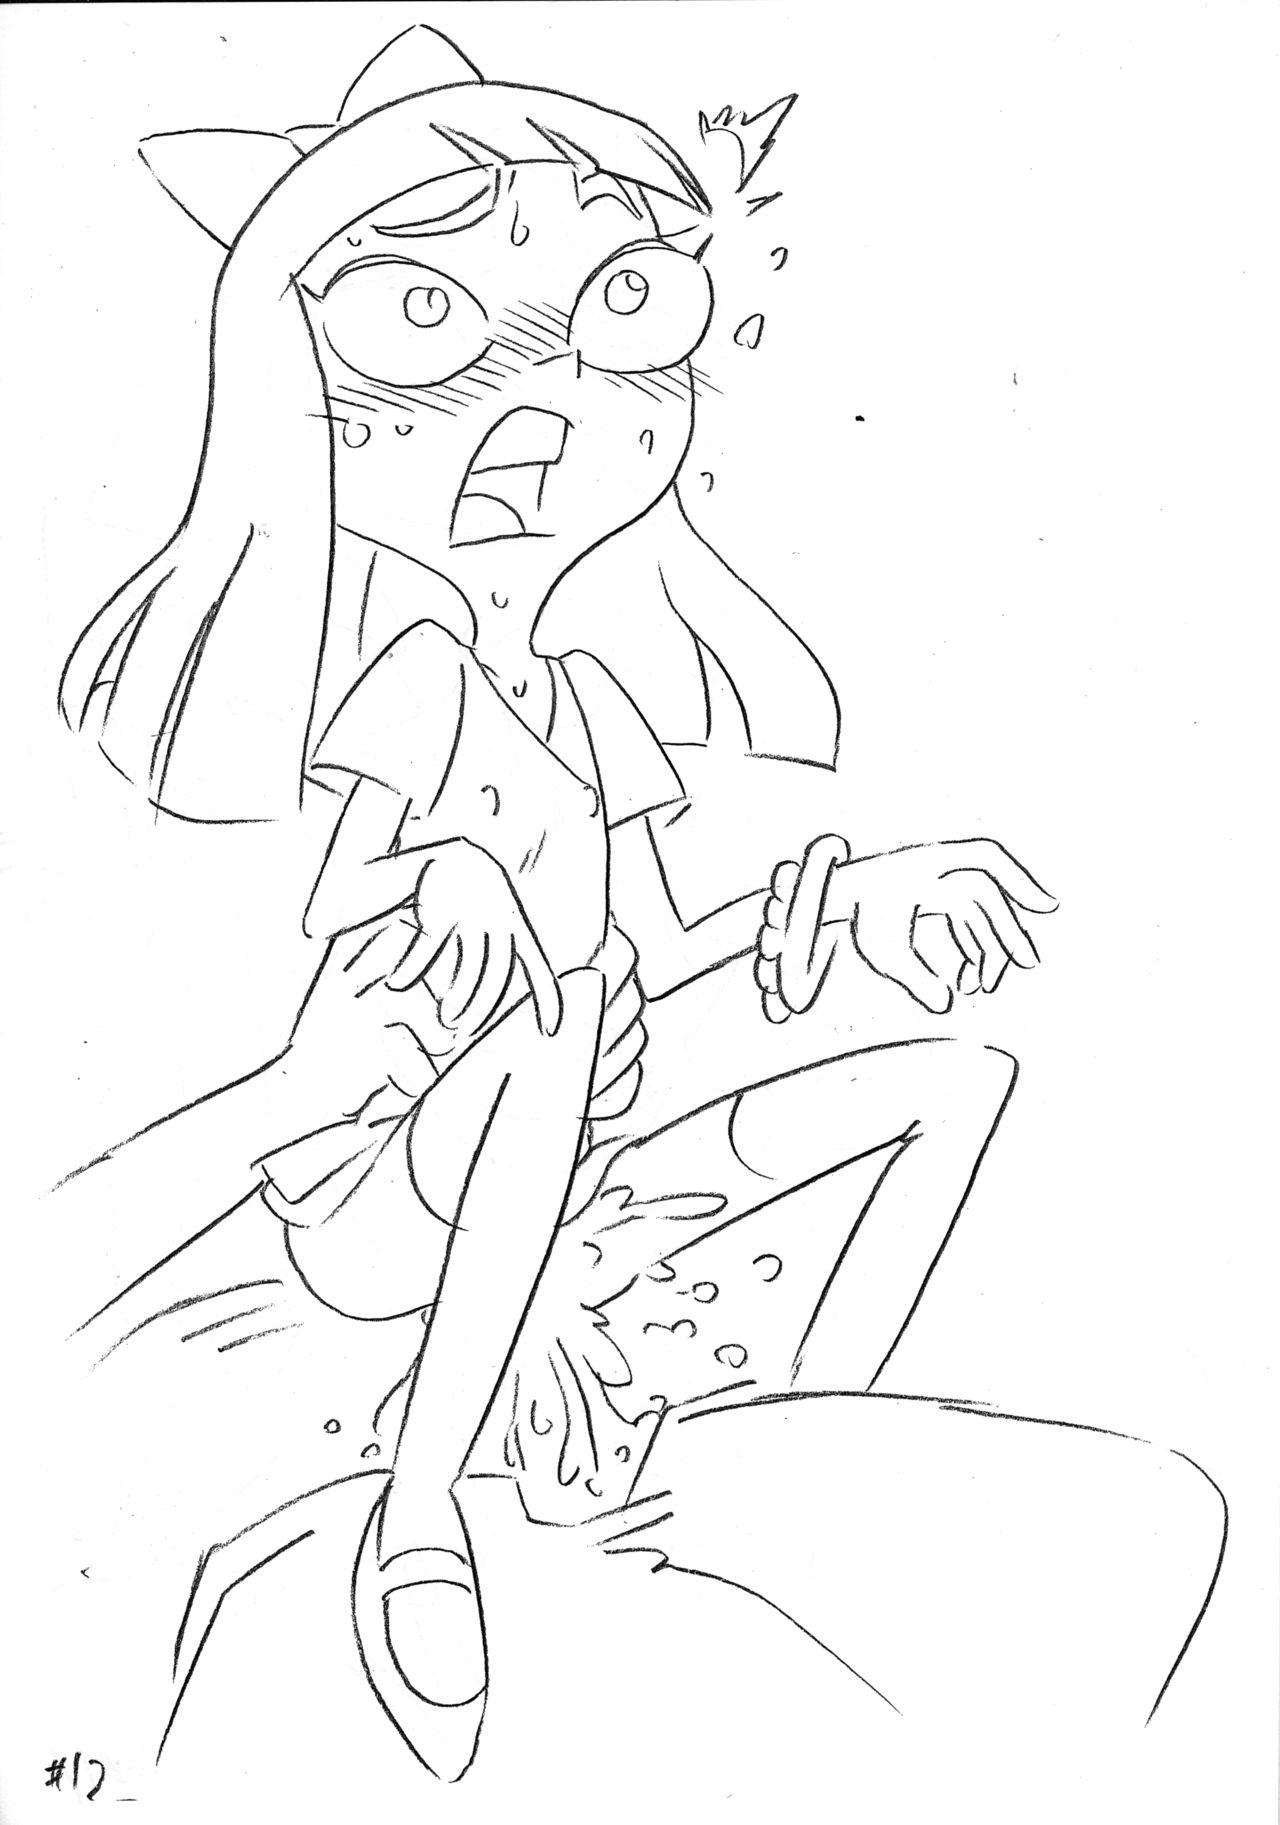 Hardcore Fuck Psychosomatic Counterfeit Ex: Stacy in Early Age - Phineas and ferb Big - Page 11